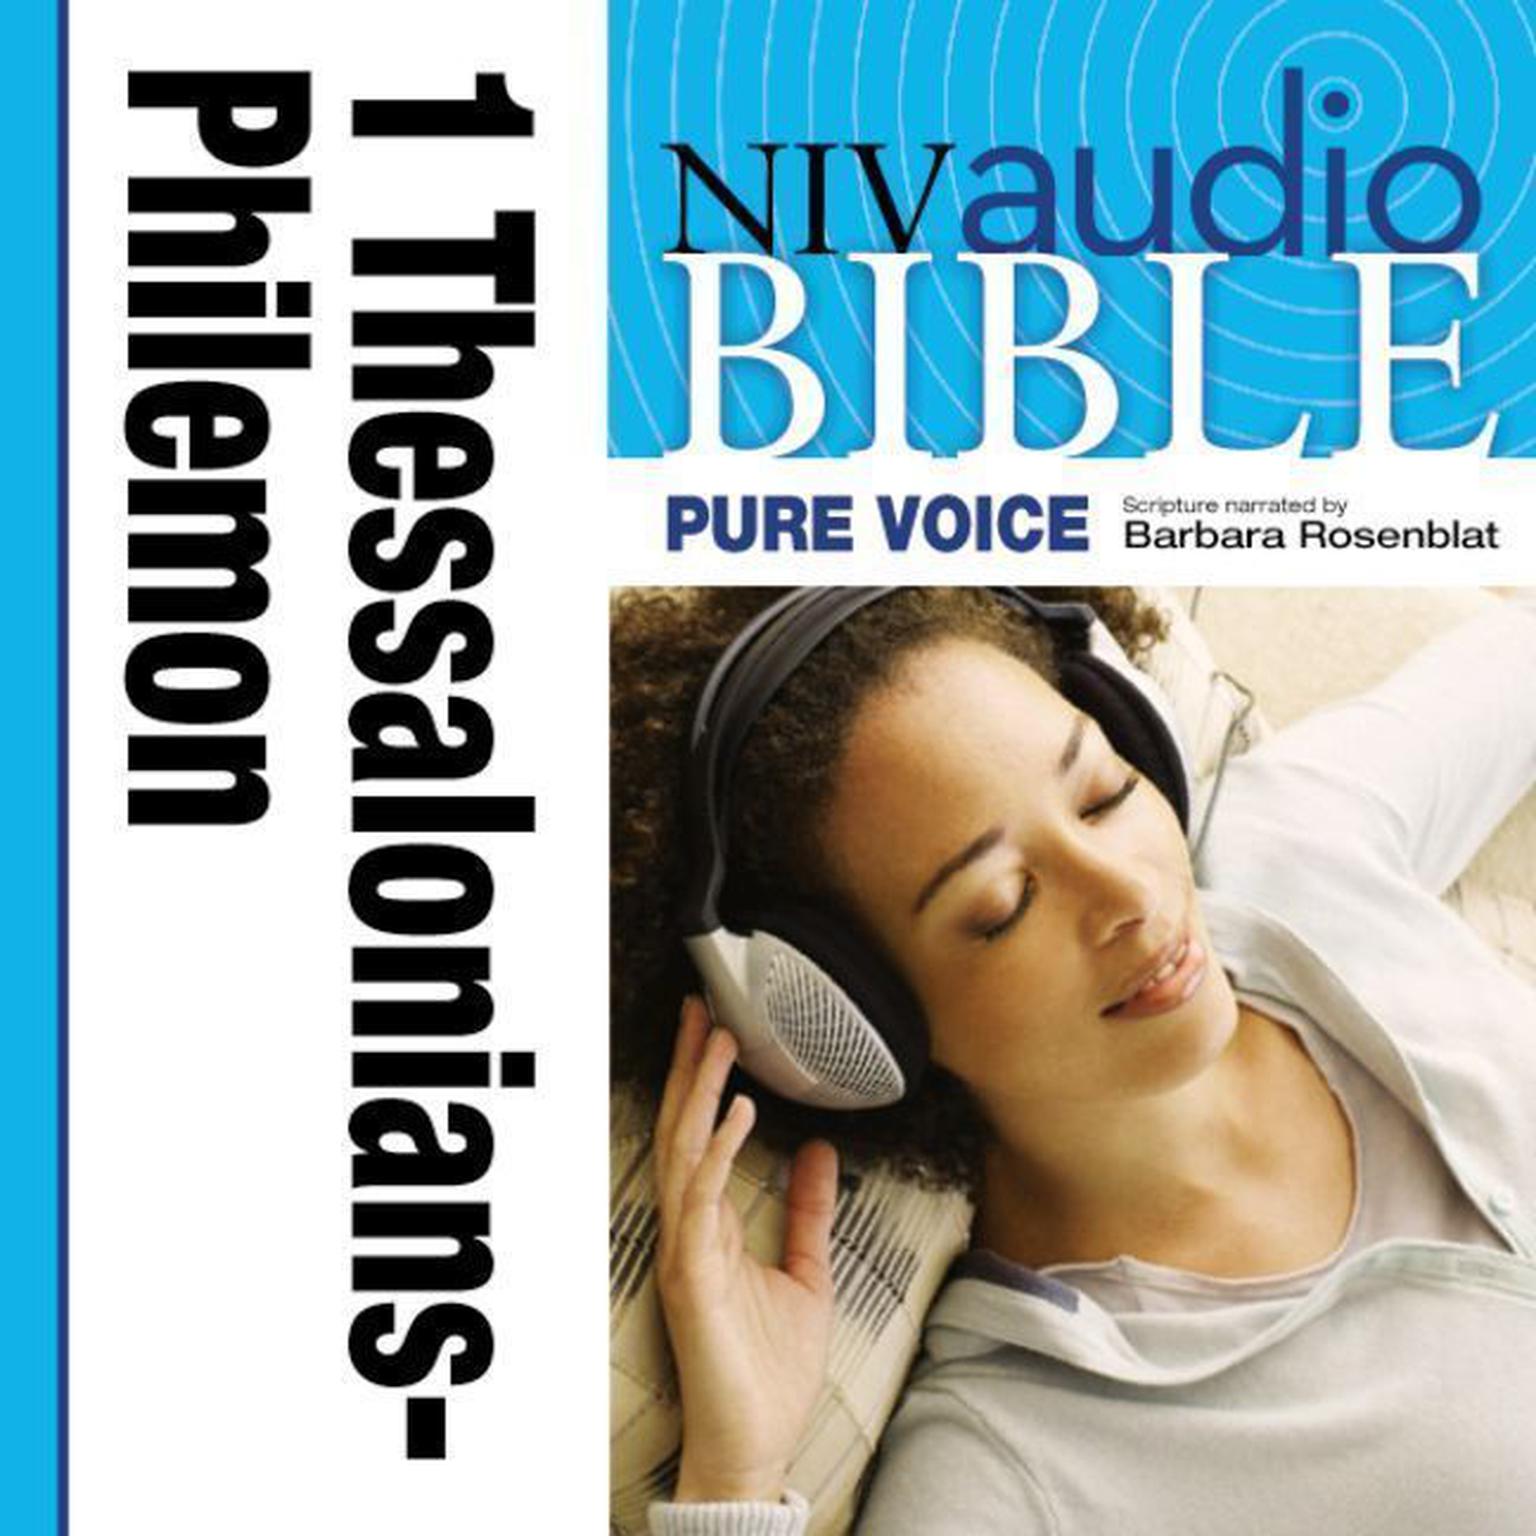 Pure Voice Audio Bible - New International Version, NIV (Narrated by Barbara Rosenblat): (09) 1 and 2 Thessalonians, 1 and 2 Timothy, Titus, and Philemon: 1 and 2 Thessalonians; 1 and 2 Timothy; Titus, and Philemon Audiobook, by Zondervan